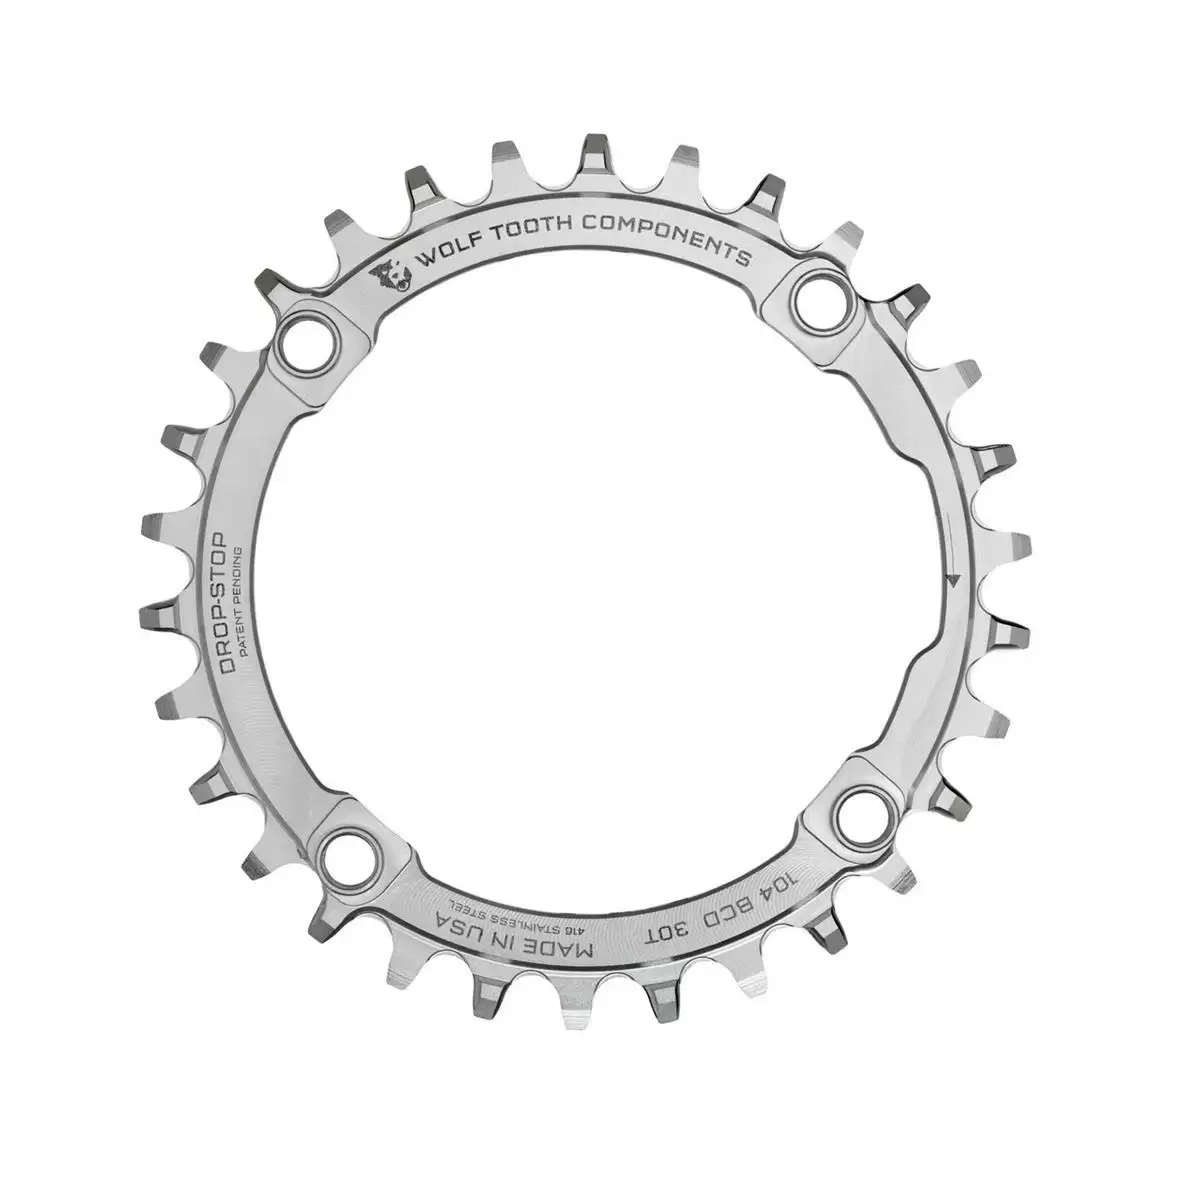 Ebike steel chainring 30t bcd 104mm - image